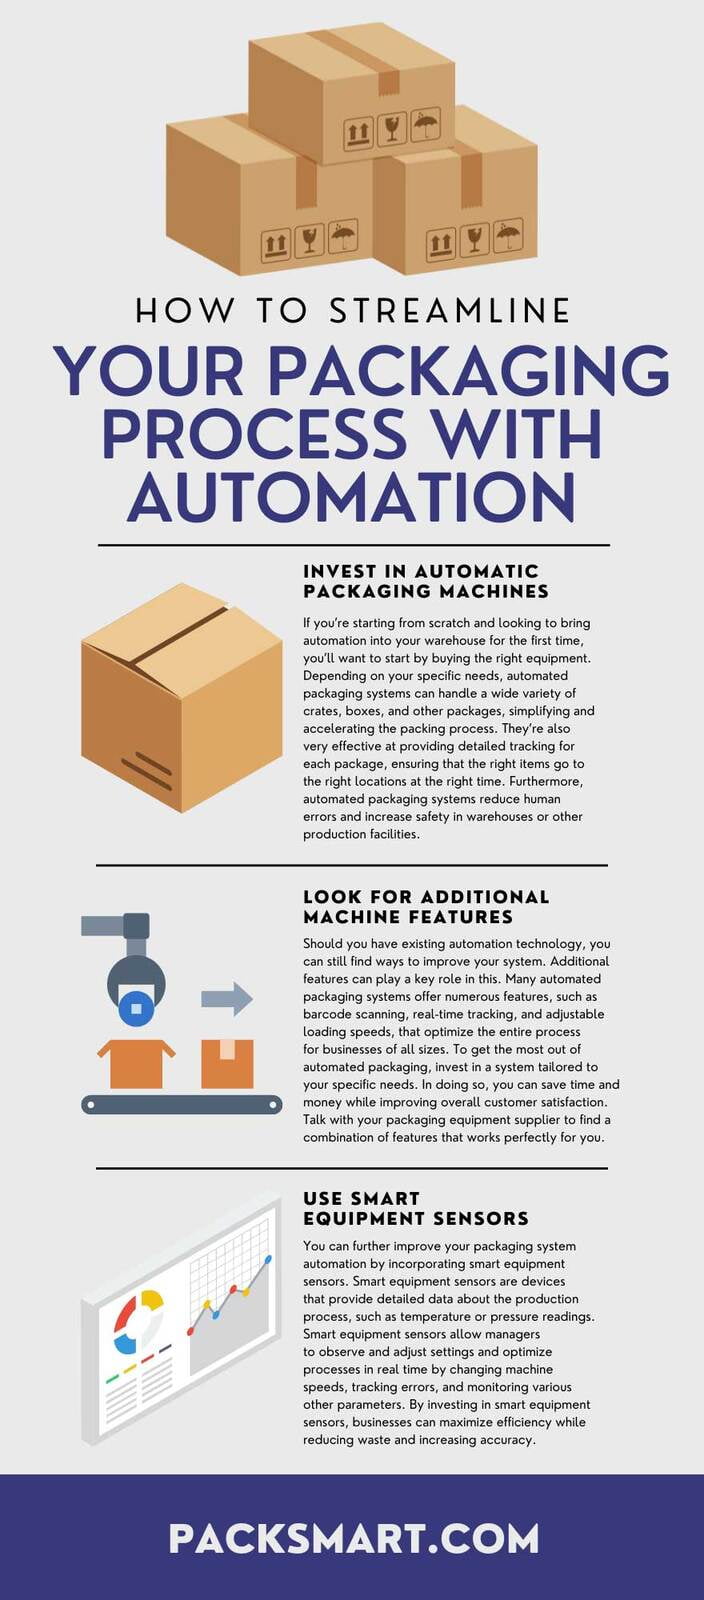 How To Streamline Your Packaging Process With Automation